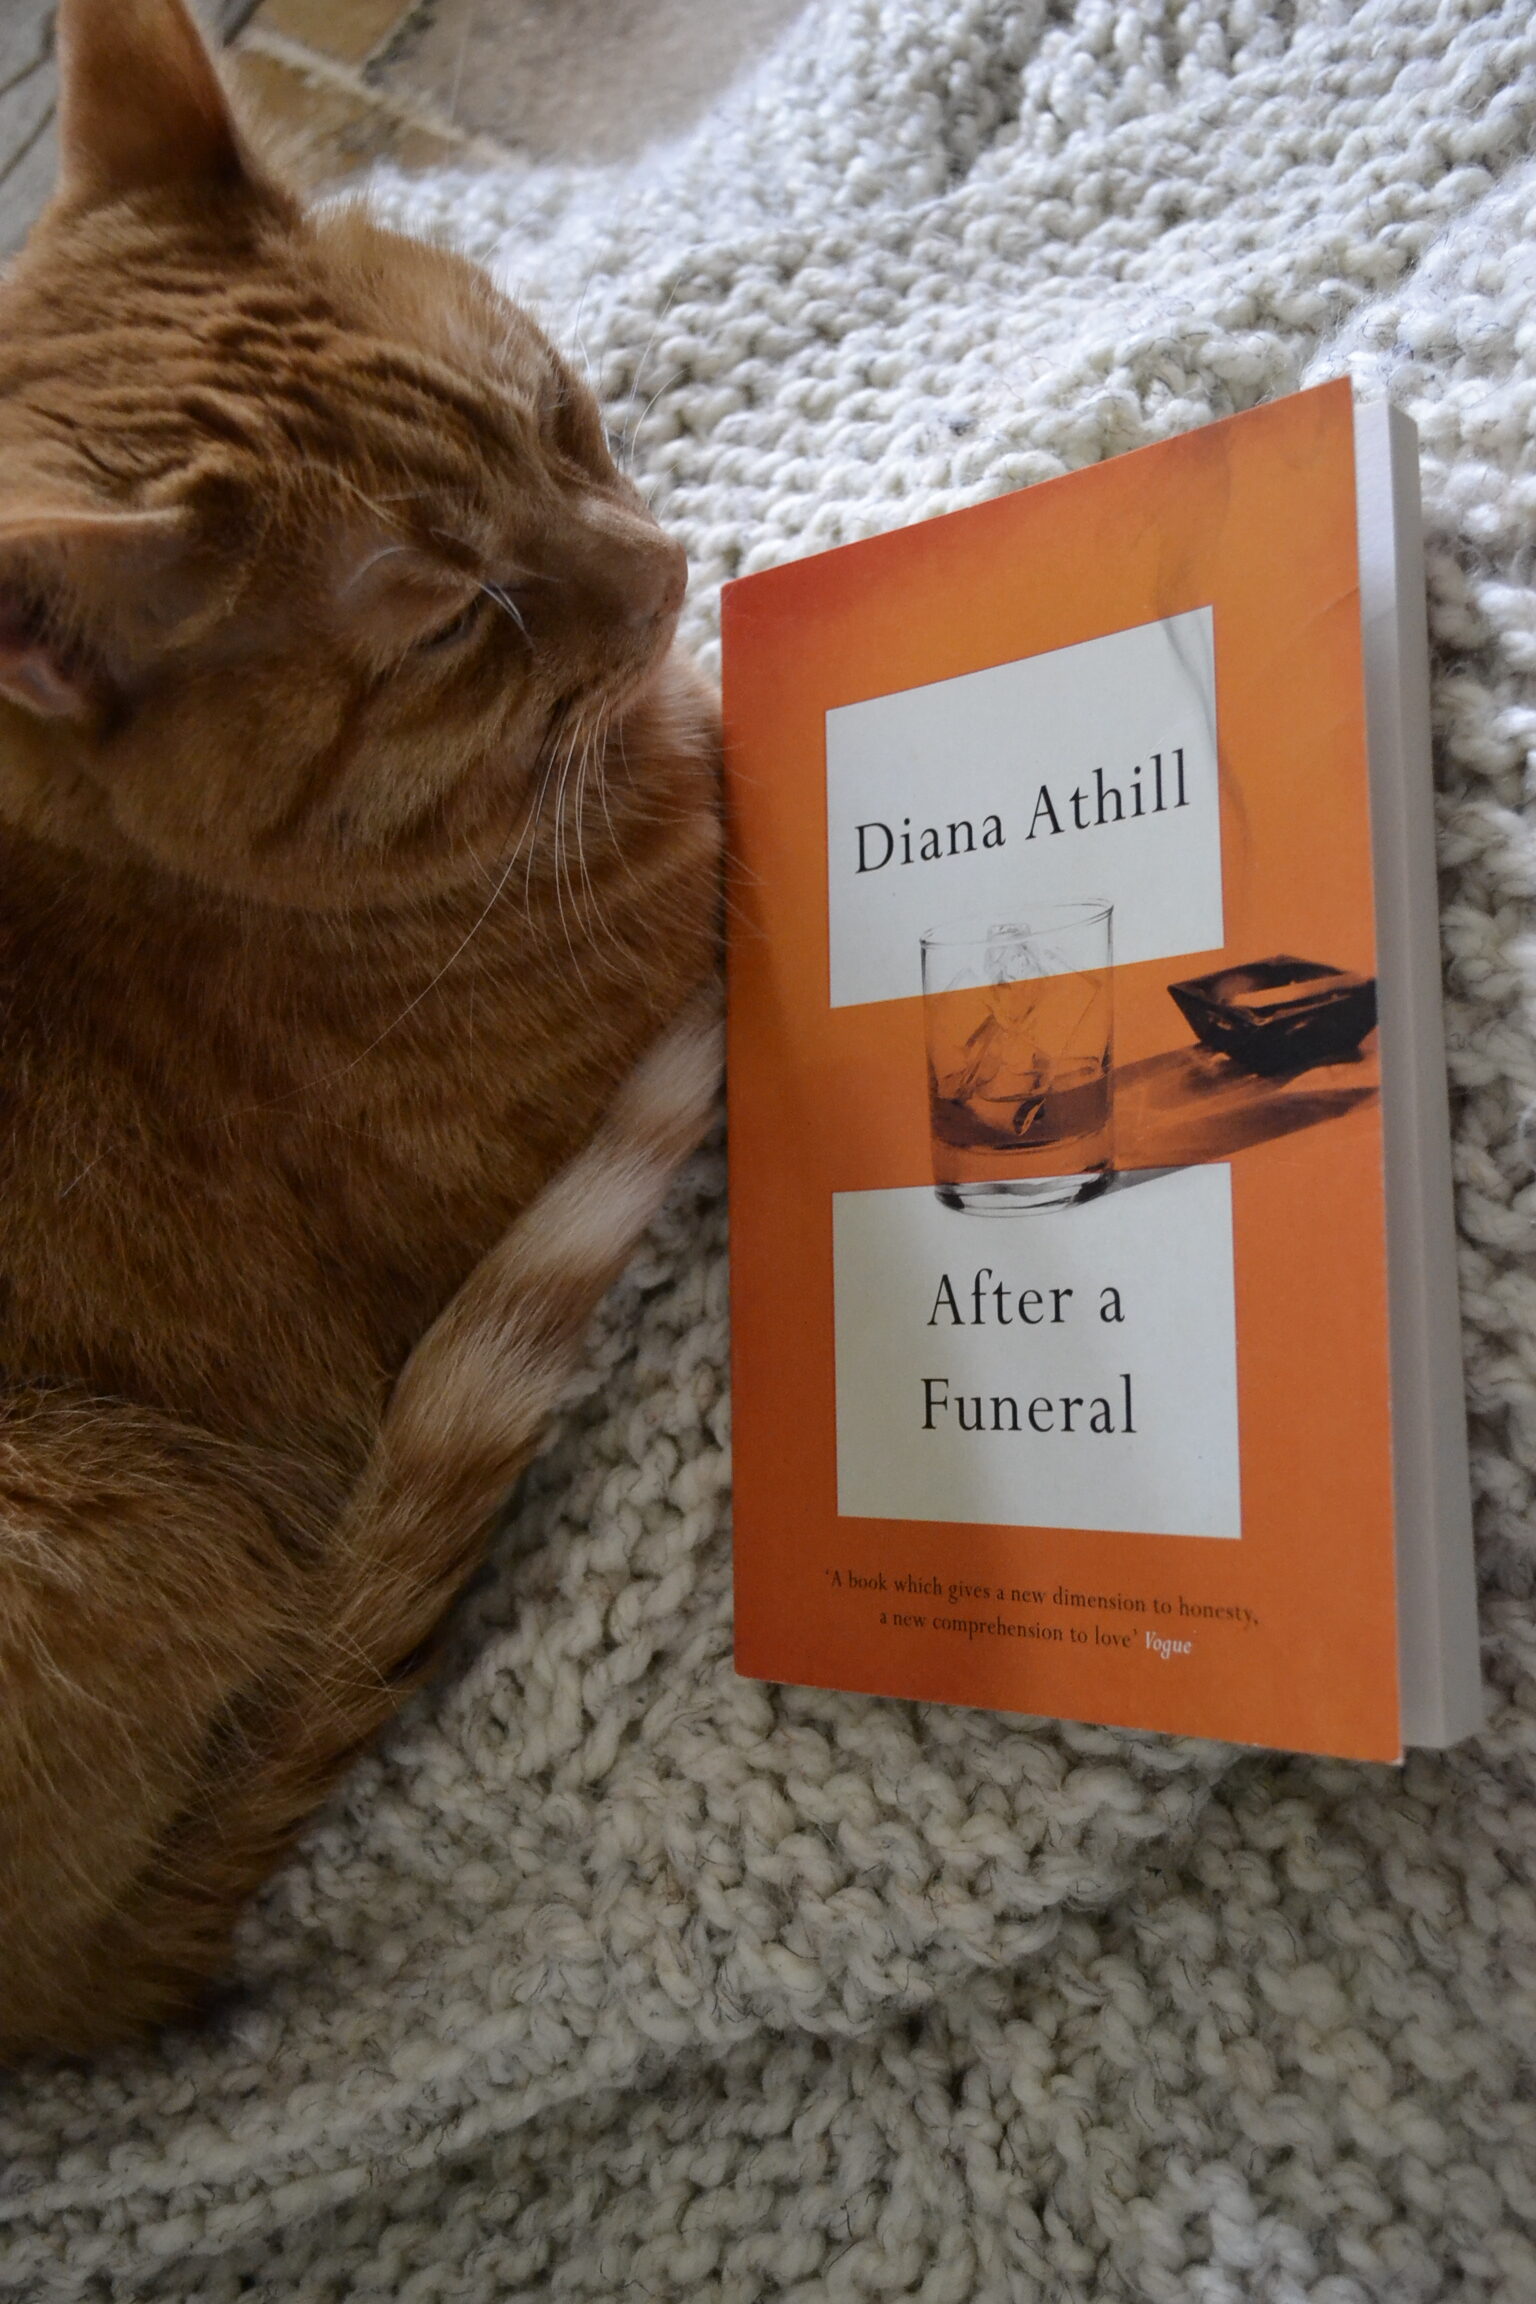 On a white blanket, an orange cat sleeps beside an orange book. The book is After a Funeral by Diana Athill.